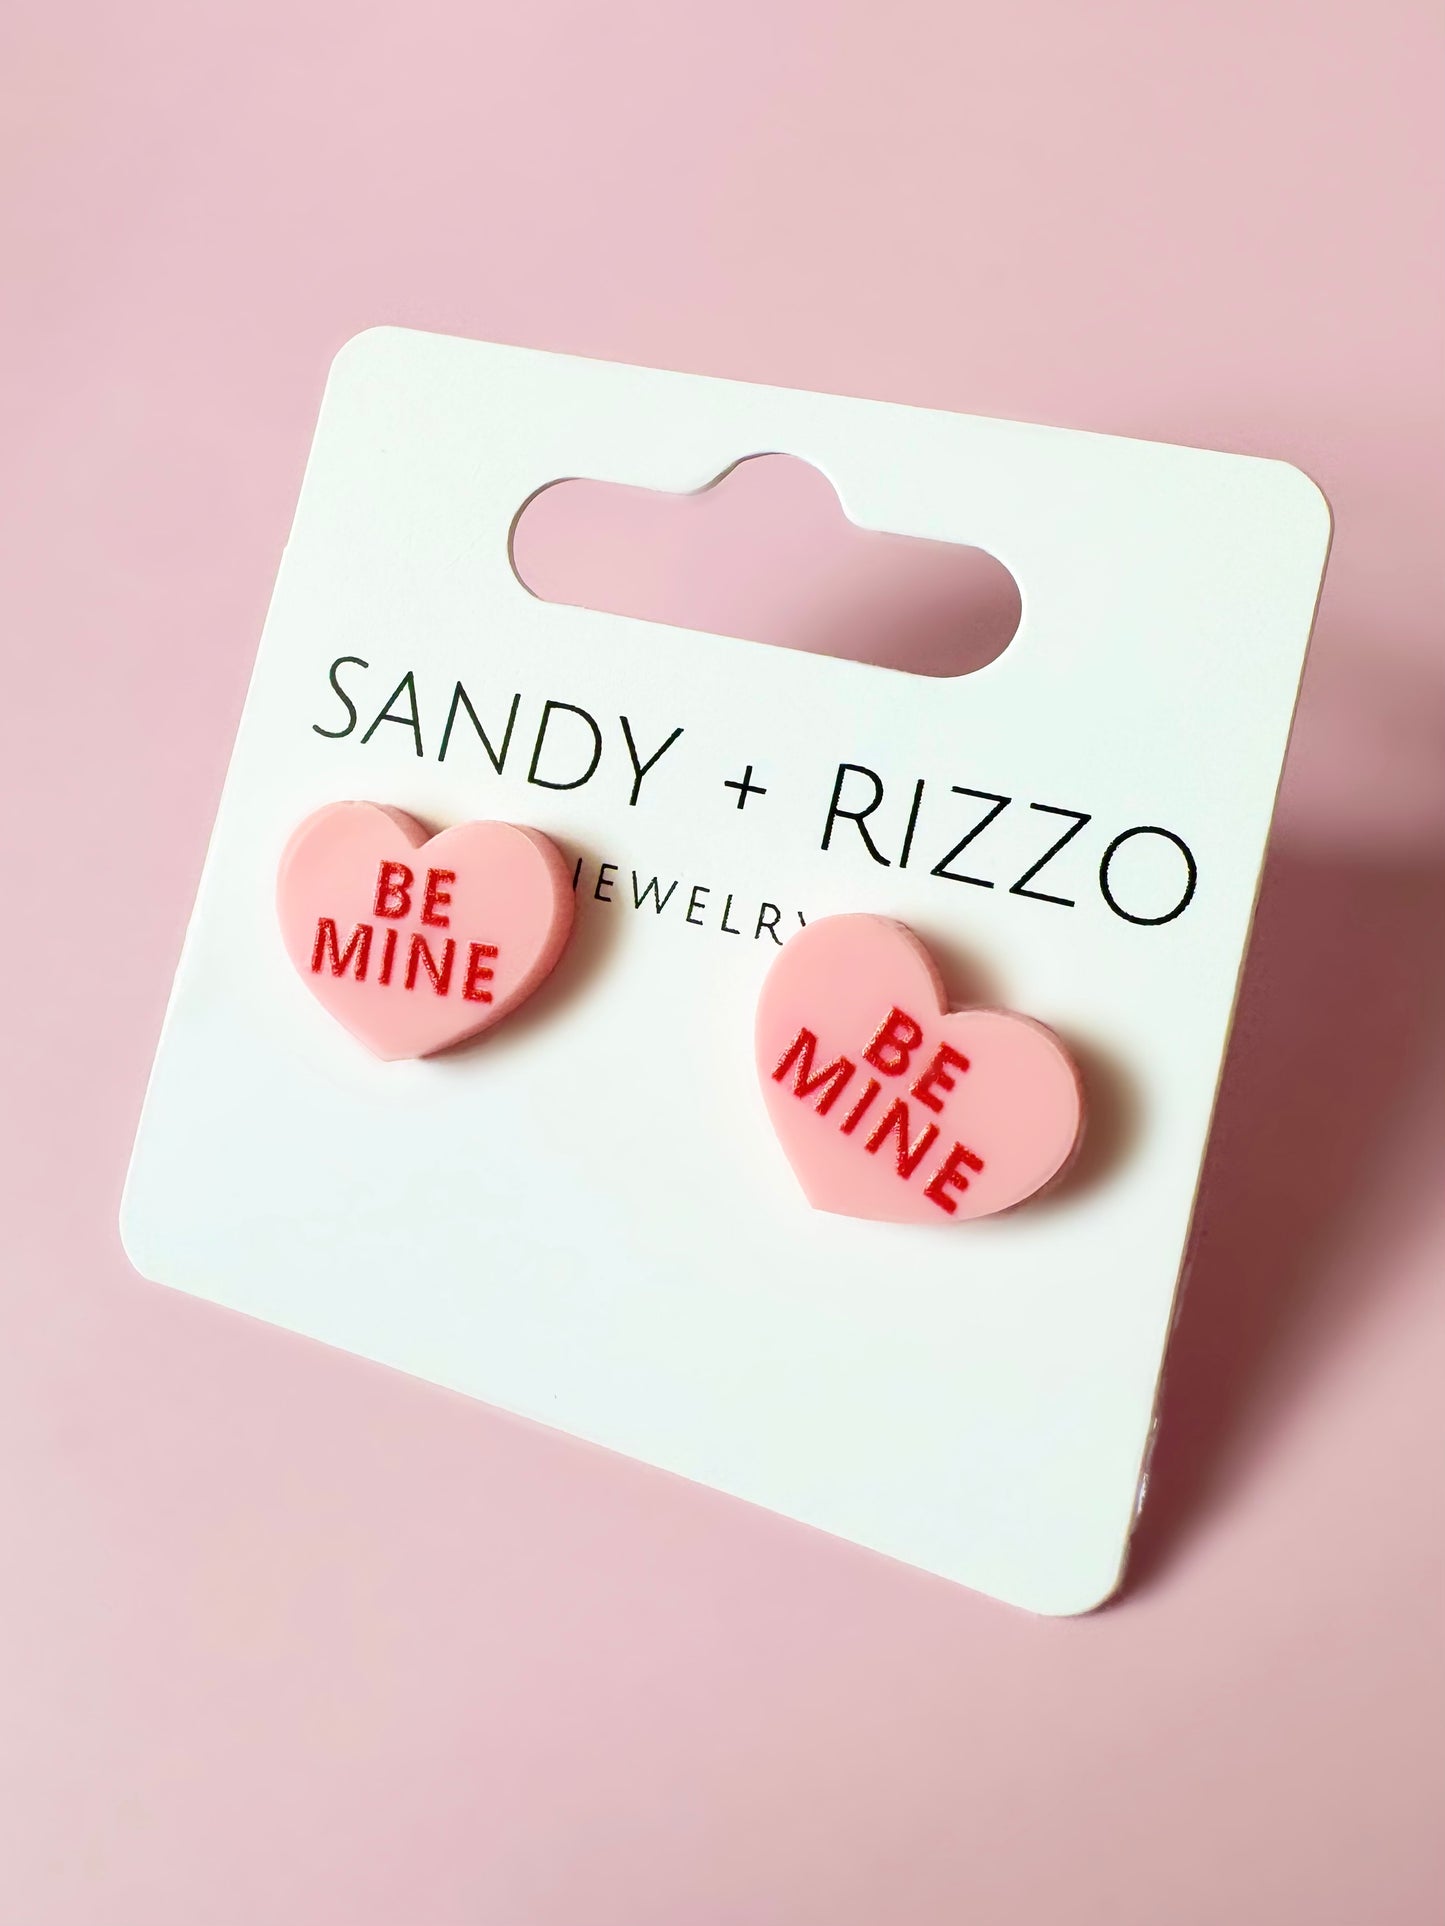 Load image into Gallery viewer, Pink Conversation Heart Stud
